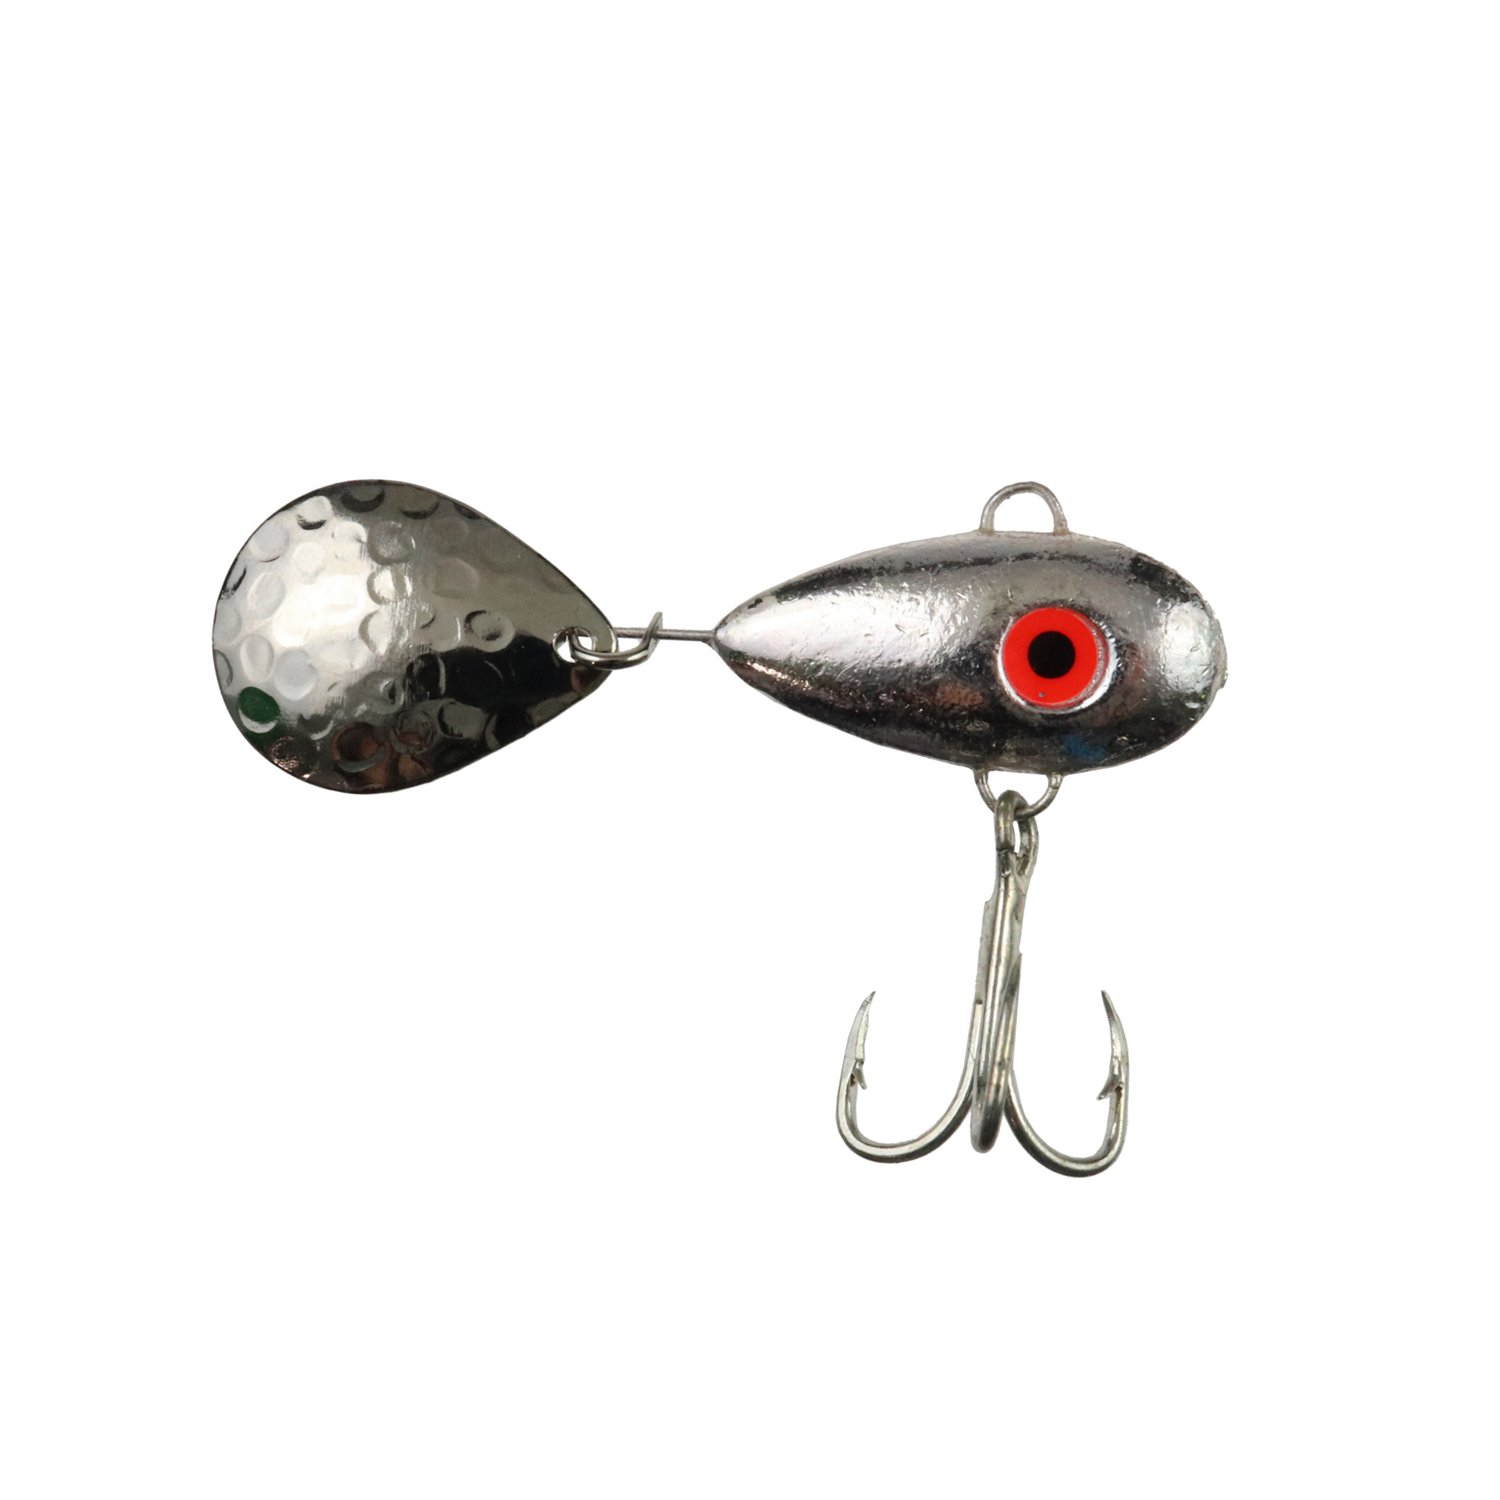 Mann's Bait Company Little George Fishing Lure, Chartreuse, 0.5 Oz.